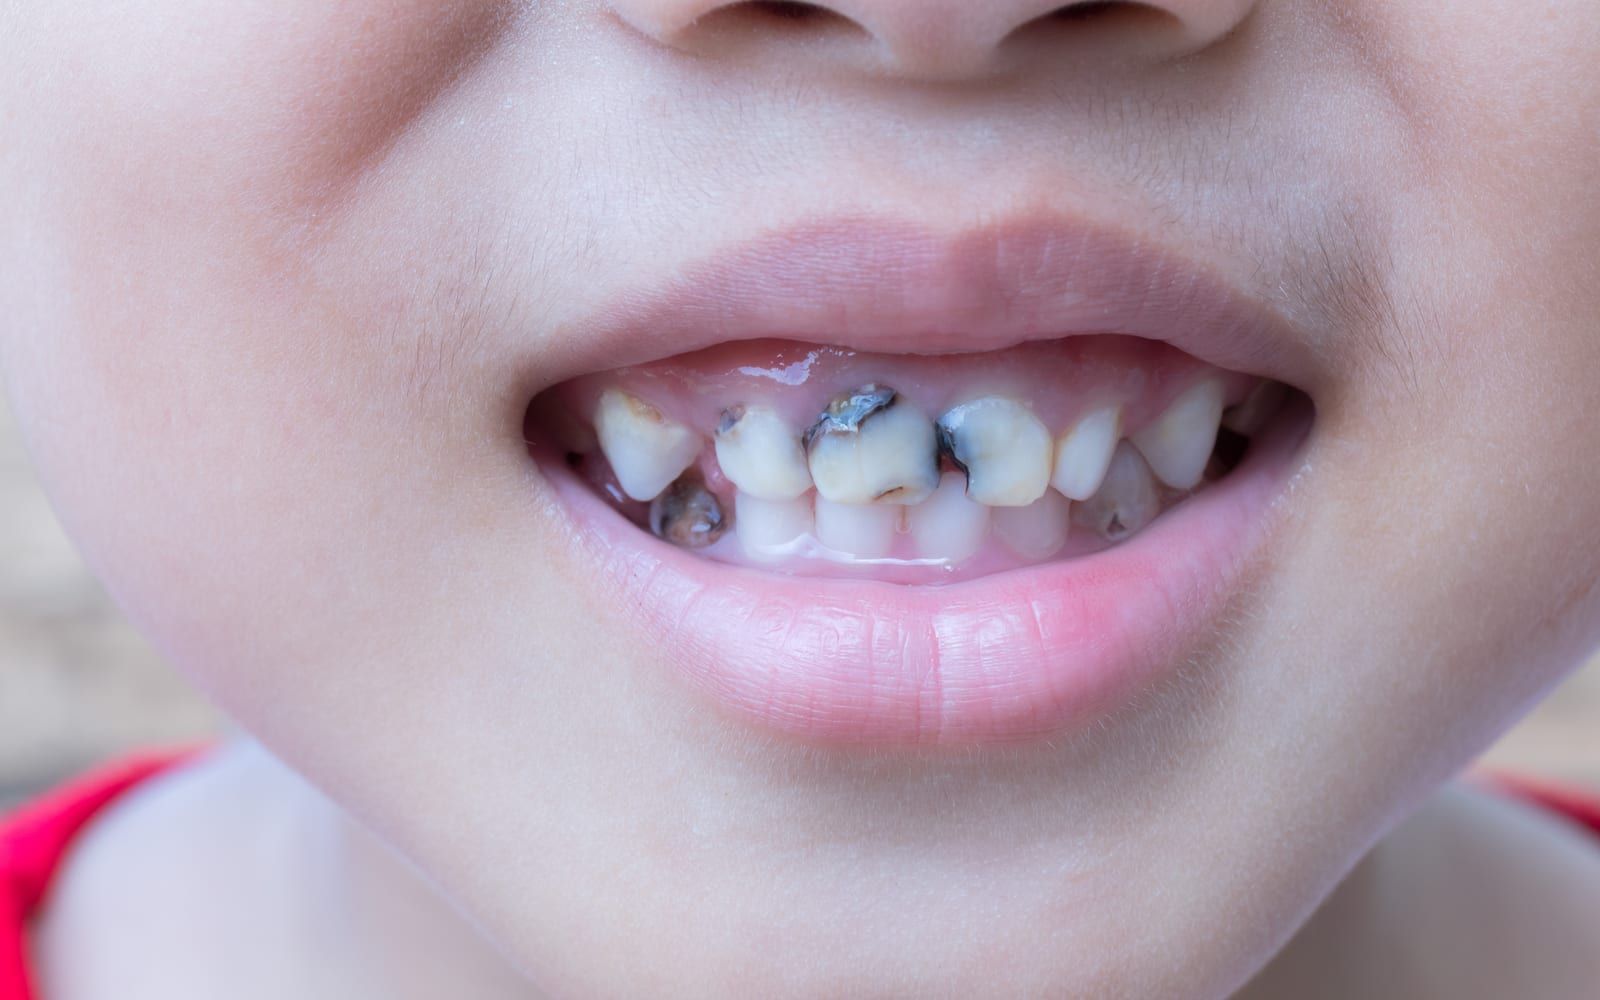 Child with decaying teeth